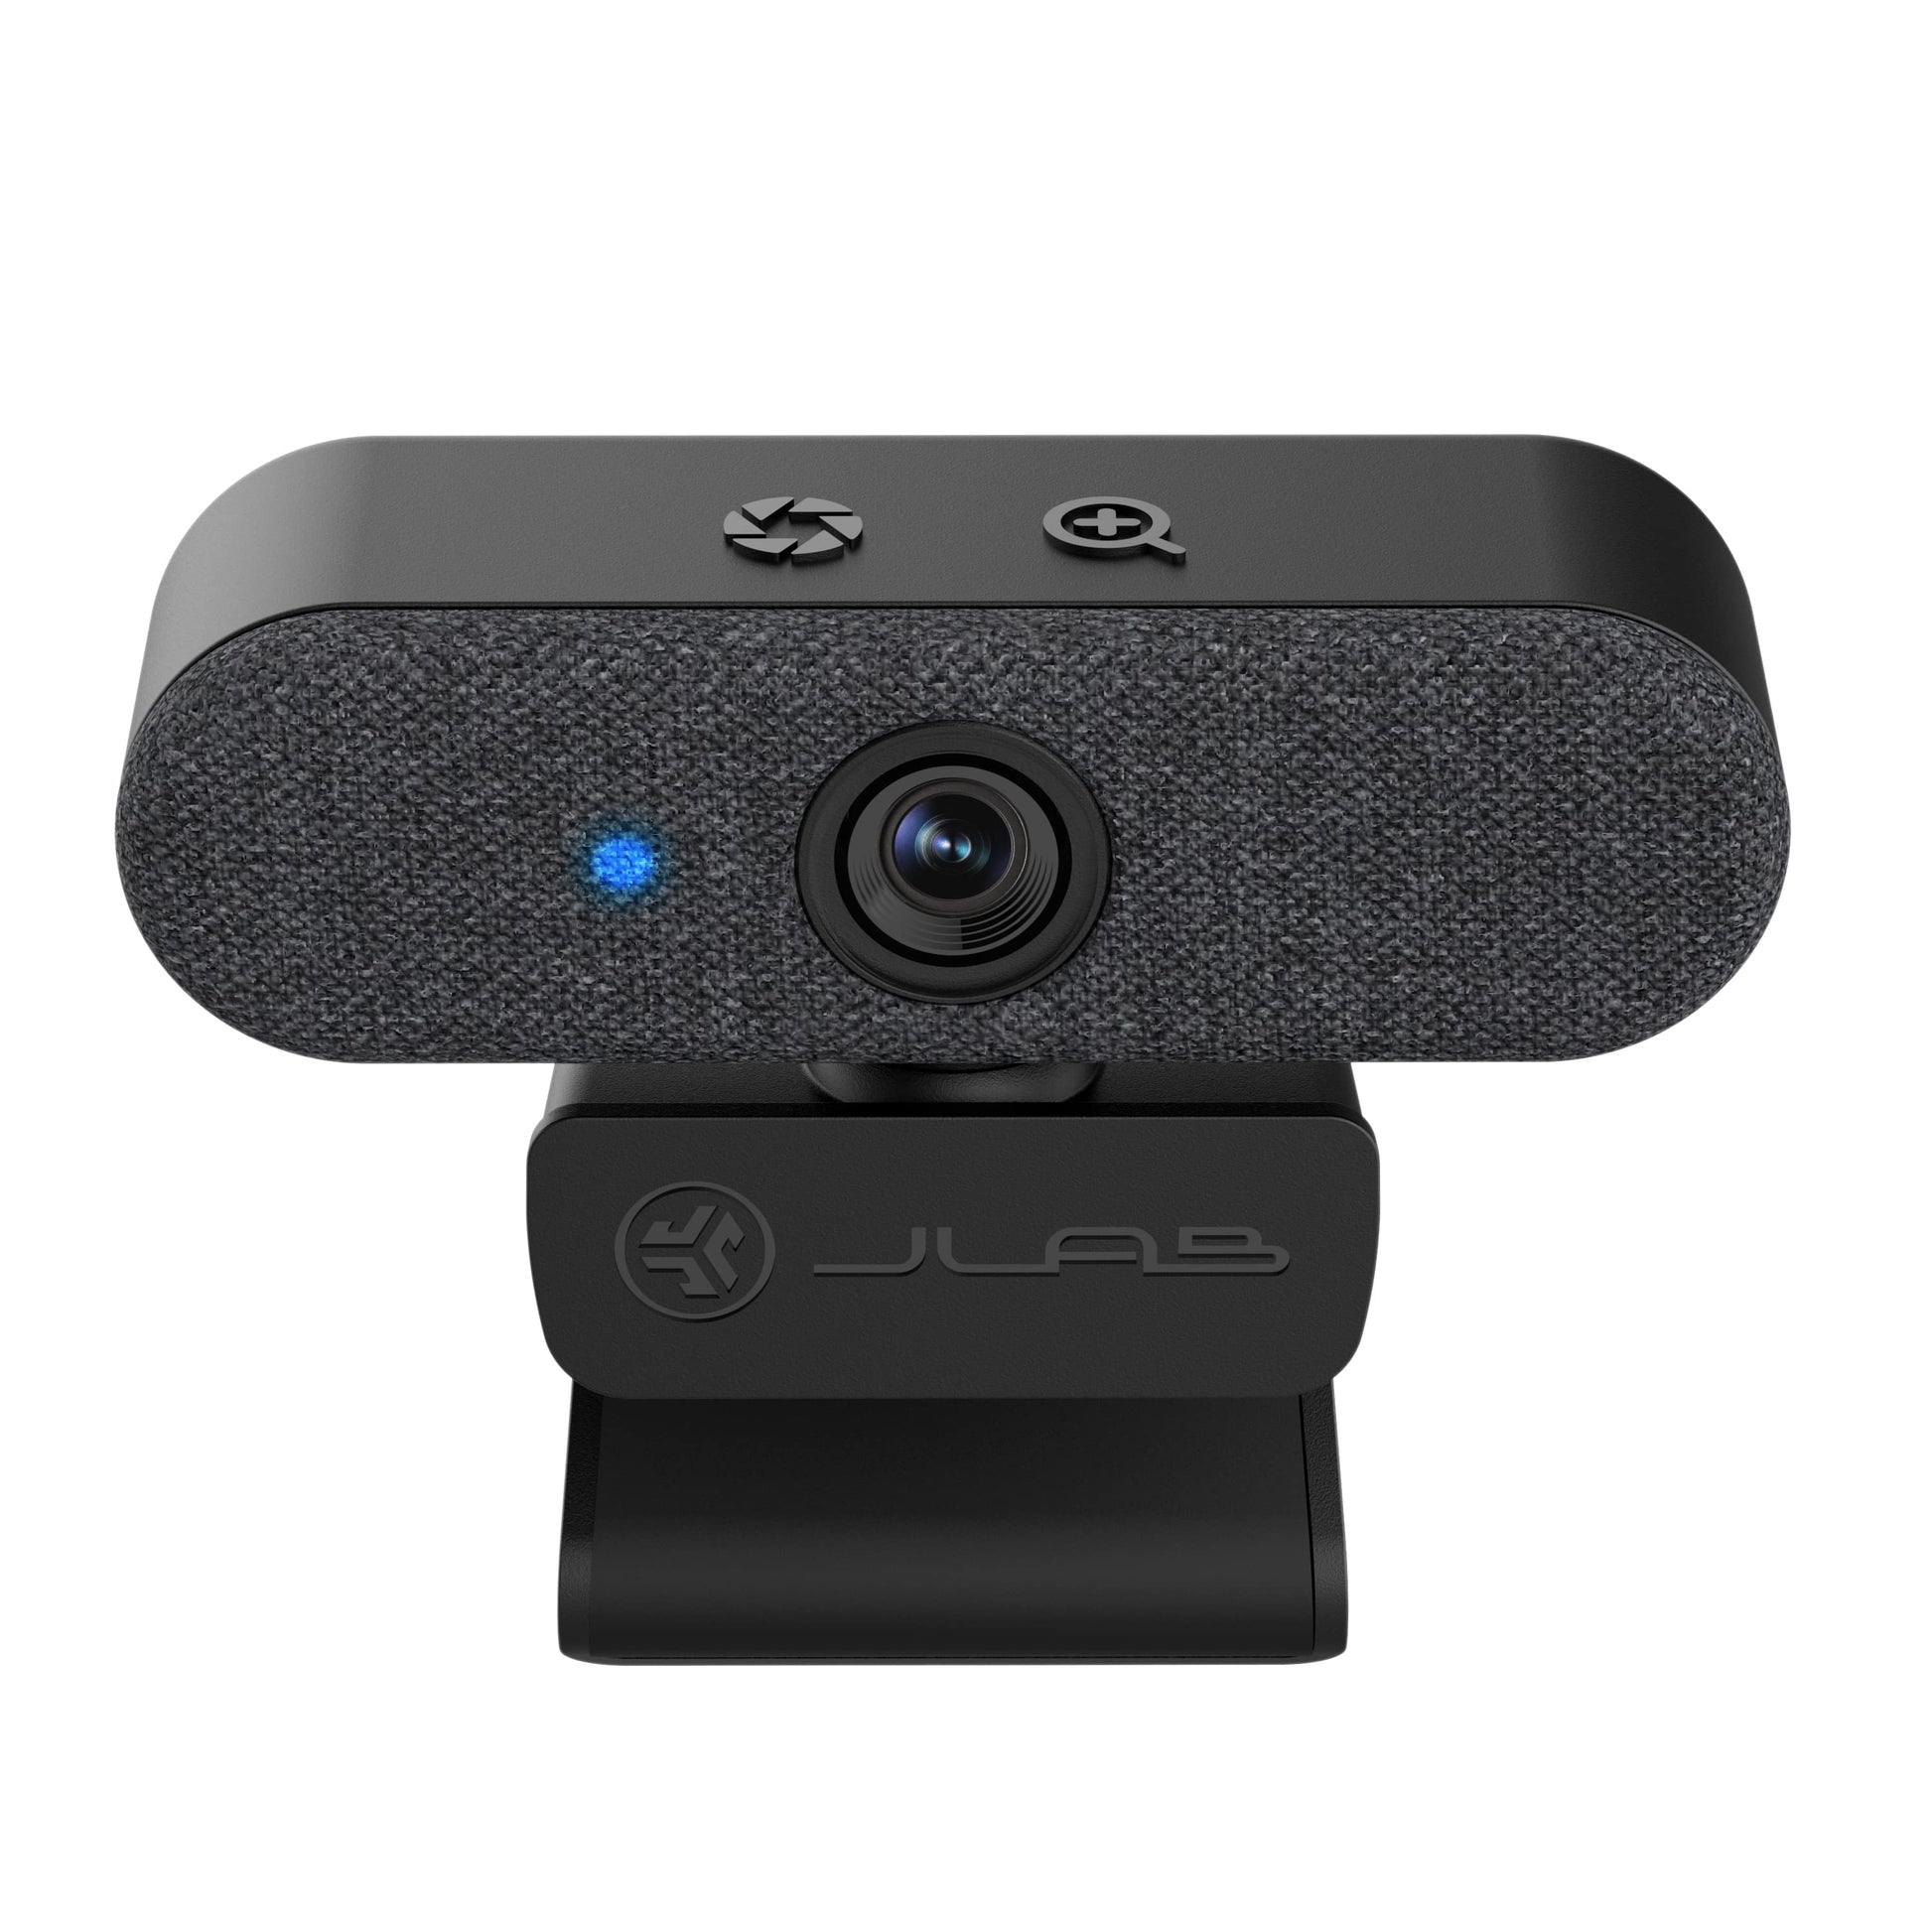 Logitech's new Brio 100 webcam offers 1080p video at a lower price point